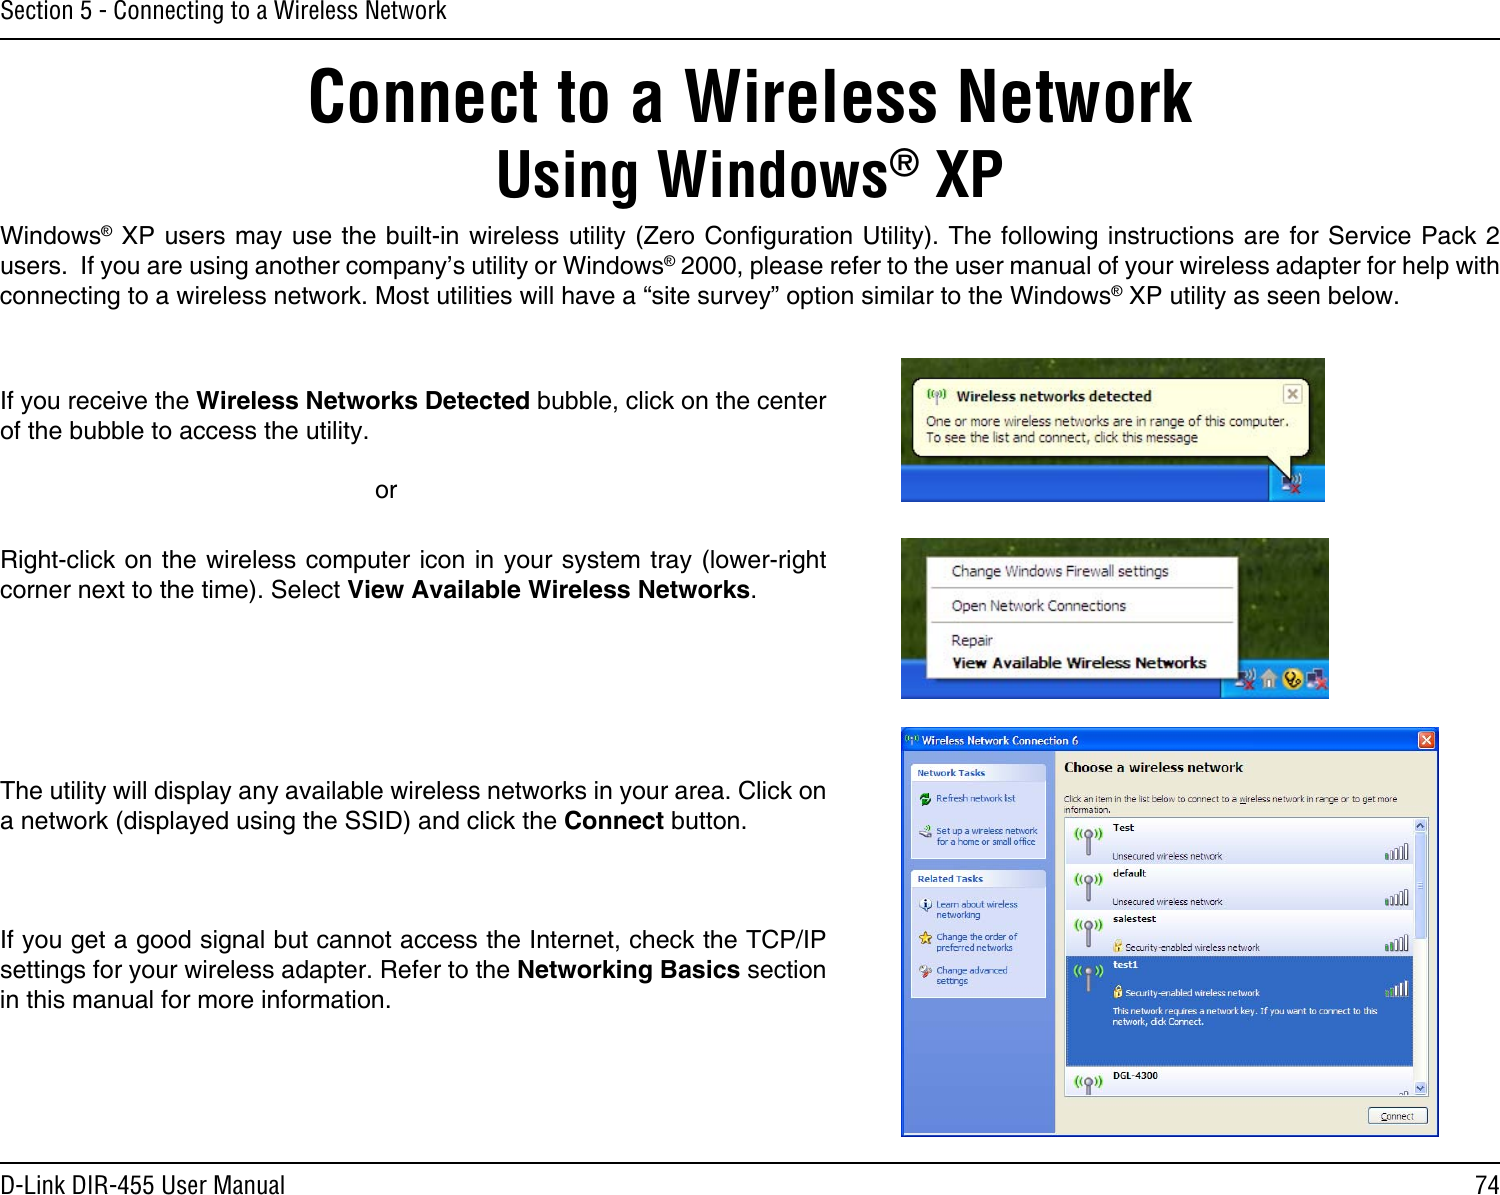 74D-Link DIR-455 User ManualSection 5 - Connecting to a Wireless NetworkConnect to a Wireless NetworkUsing Windows® XPWindows® XP users may use the built-in wireless utility (Zero Conguration Utility). The following instructions are  for Service Pack 2 users.  If you are using another company’s utility or Windows® 2000, please refer to the user manual of your wireless adapter for help with connecting to a wireless network. Most utilities will have a “site survey” option similar to the Windows® XP utility as seen below.Right-click on the wireless computer icon in your system tray (lower-right corner next to the time). Select View Available Wireless Networks.If you receive the Wireless Networks Detected bubble, click on the center of the bubble to access the utility.     orThe utility will display any available wireless networks in your area. Click on a network (displayed using the SSID) and click the Connect button.If you get a good signal but cannot access the Internet, check the TCP/IP settings for your wireless adapter. Refer to the Networking Basics section in this manual for more information.